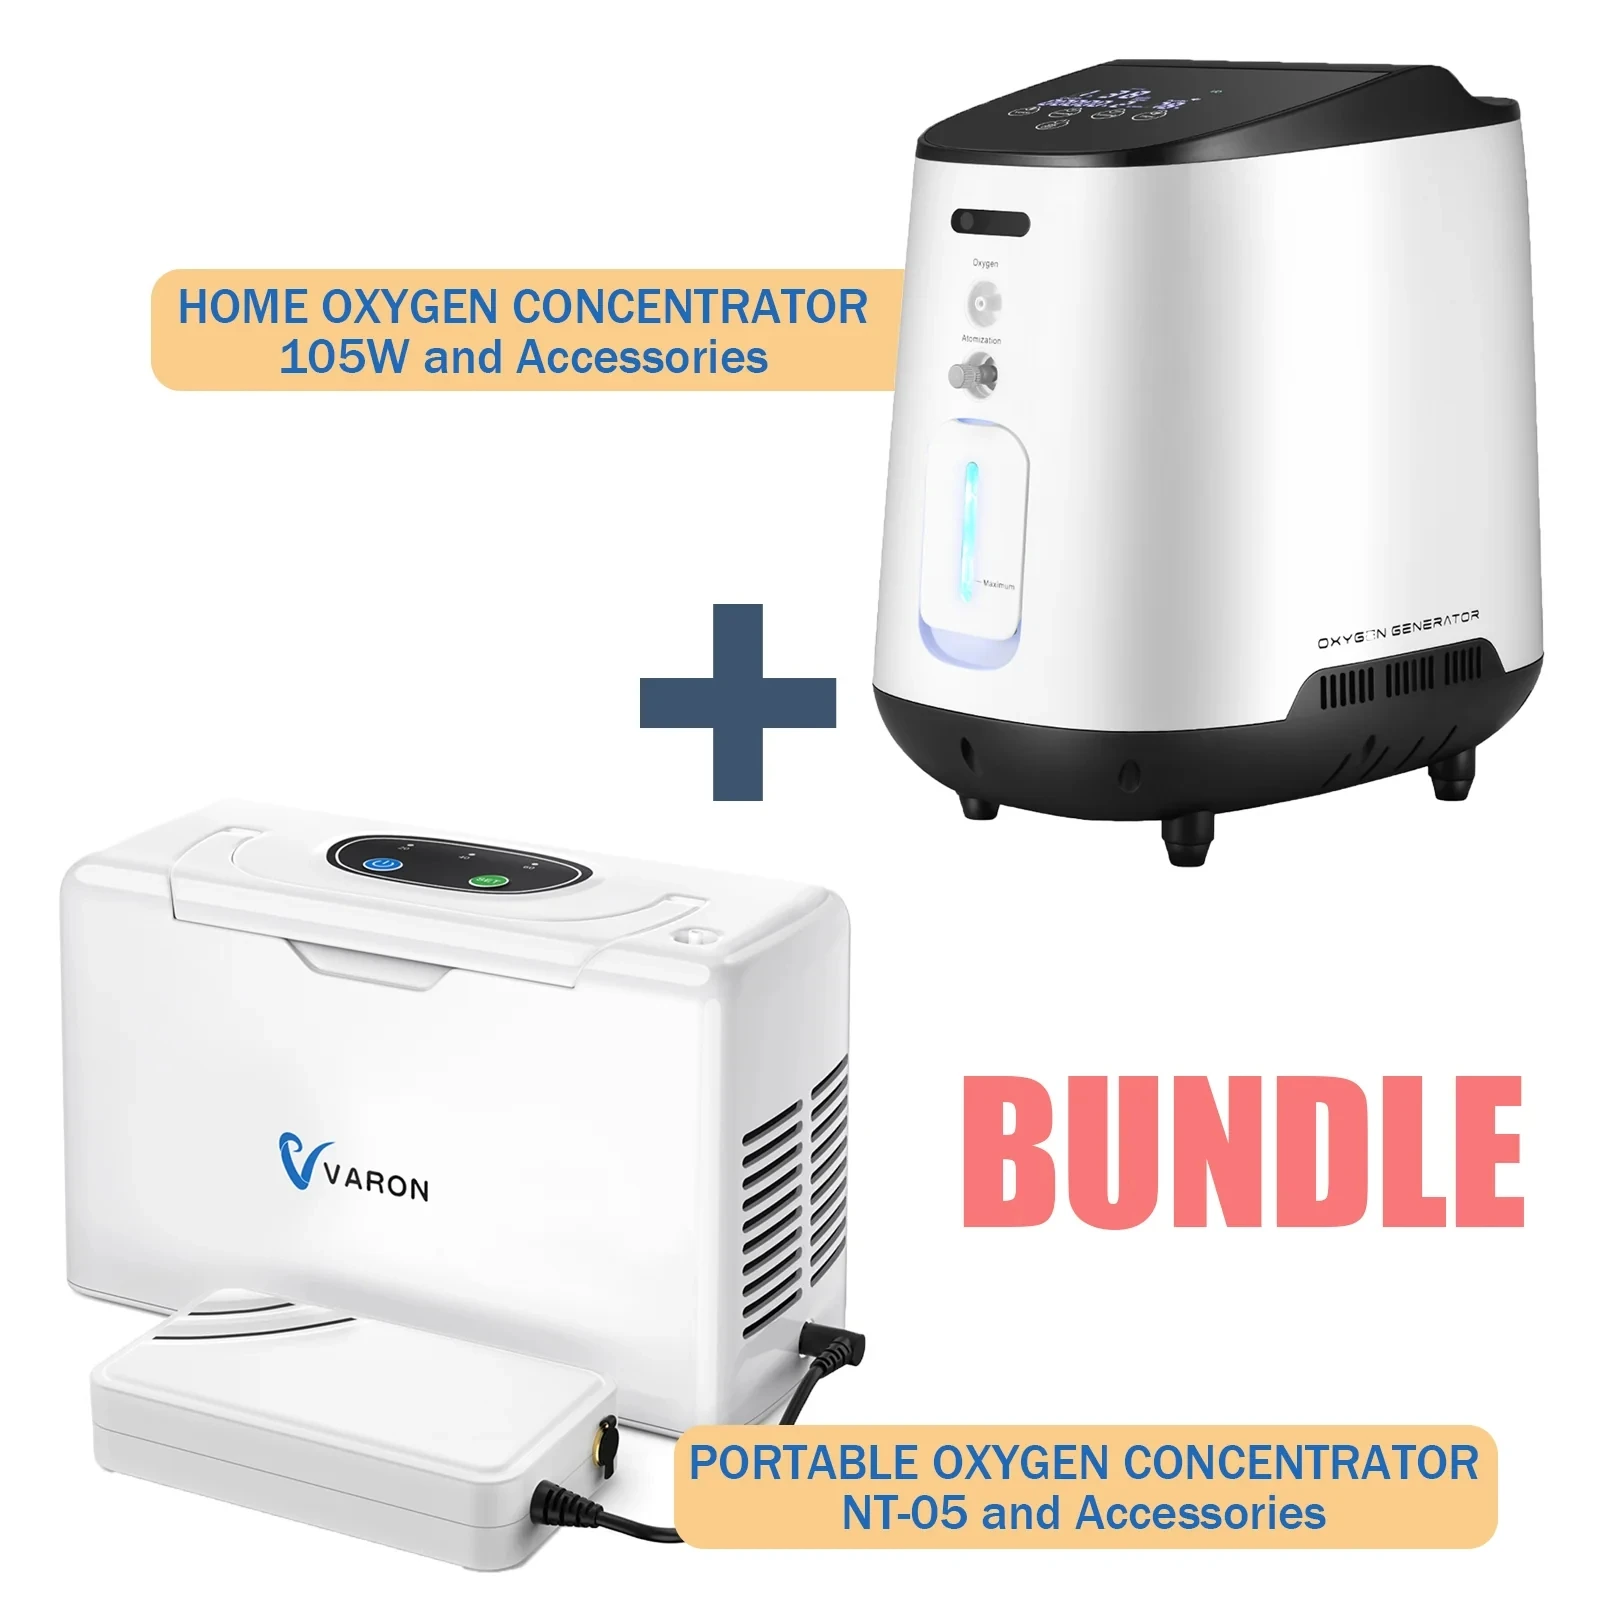 

Varon Household&Light Portable Series Combine, 0xy Con-cen-trator, Air Purifier, Suit for Use Indoor/Outdoor/Travel, US Stock